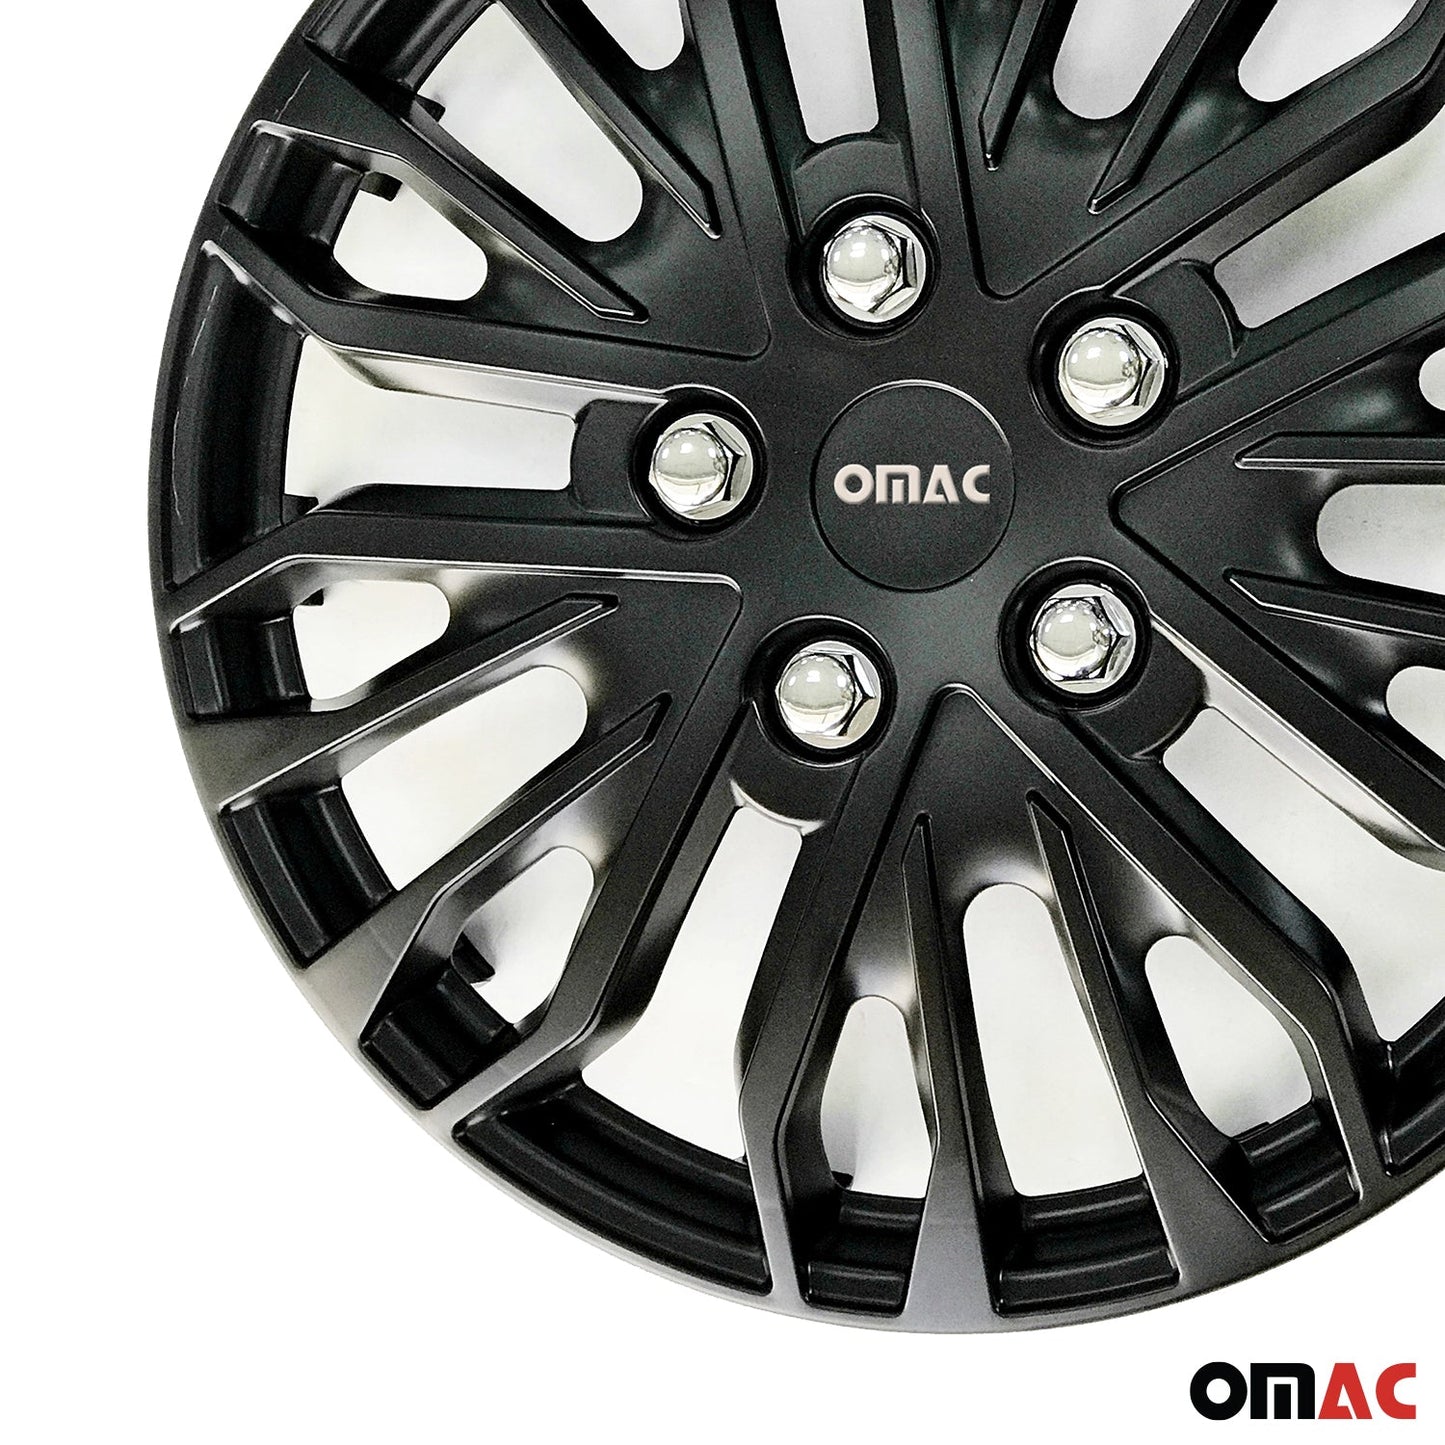 OMAC 16" Wheel Covers Guard Hub Caps Durable Snap On ABS Black Silver 4x OMAC-WE41-MBK16